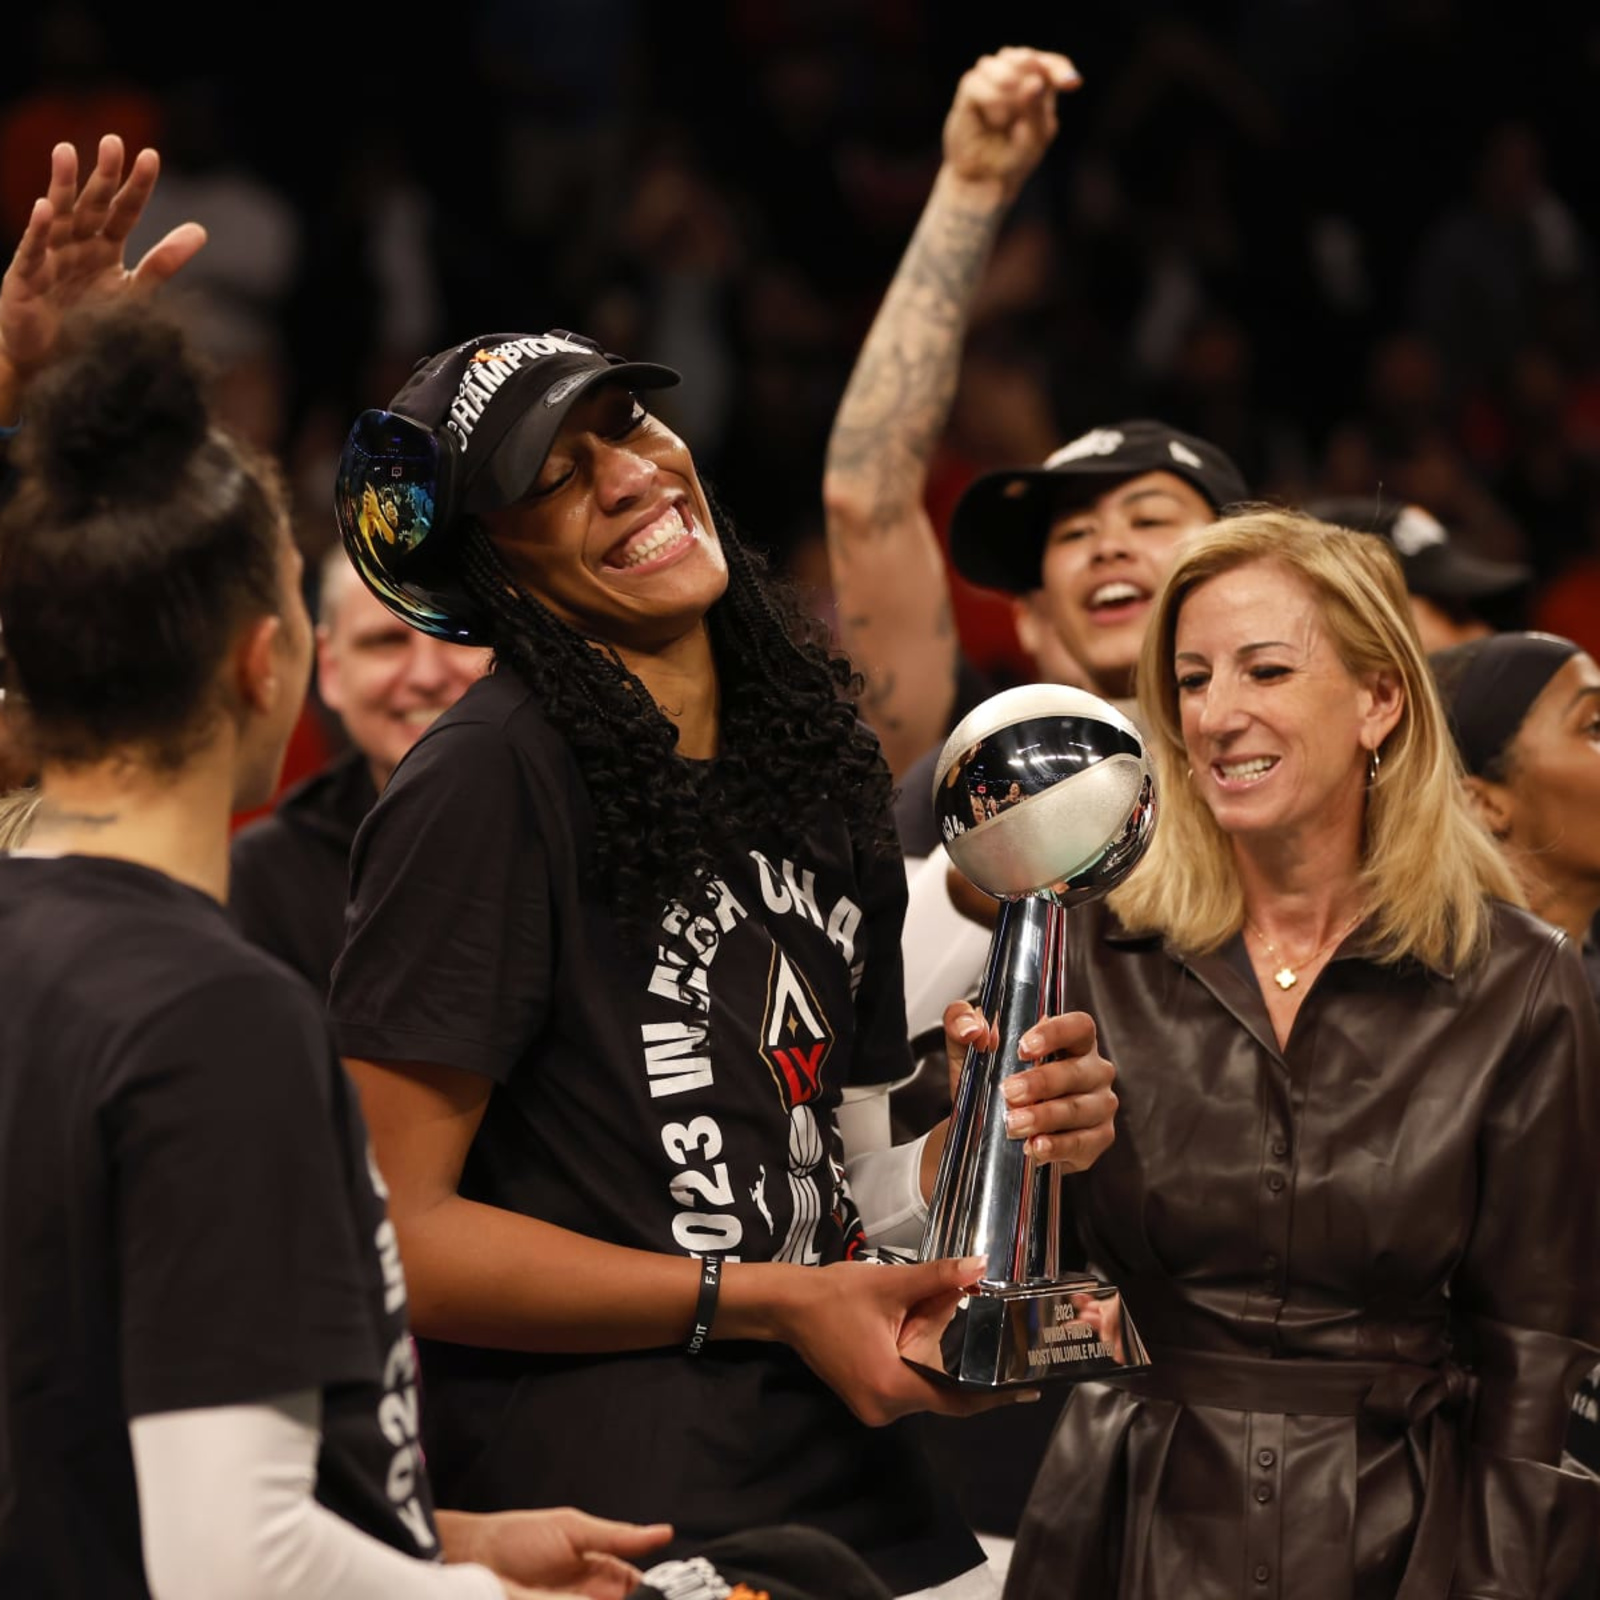 Las Vegas Aces become WNBA's 1st repeat champions in 21 years